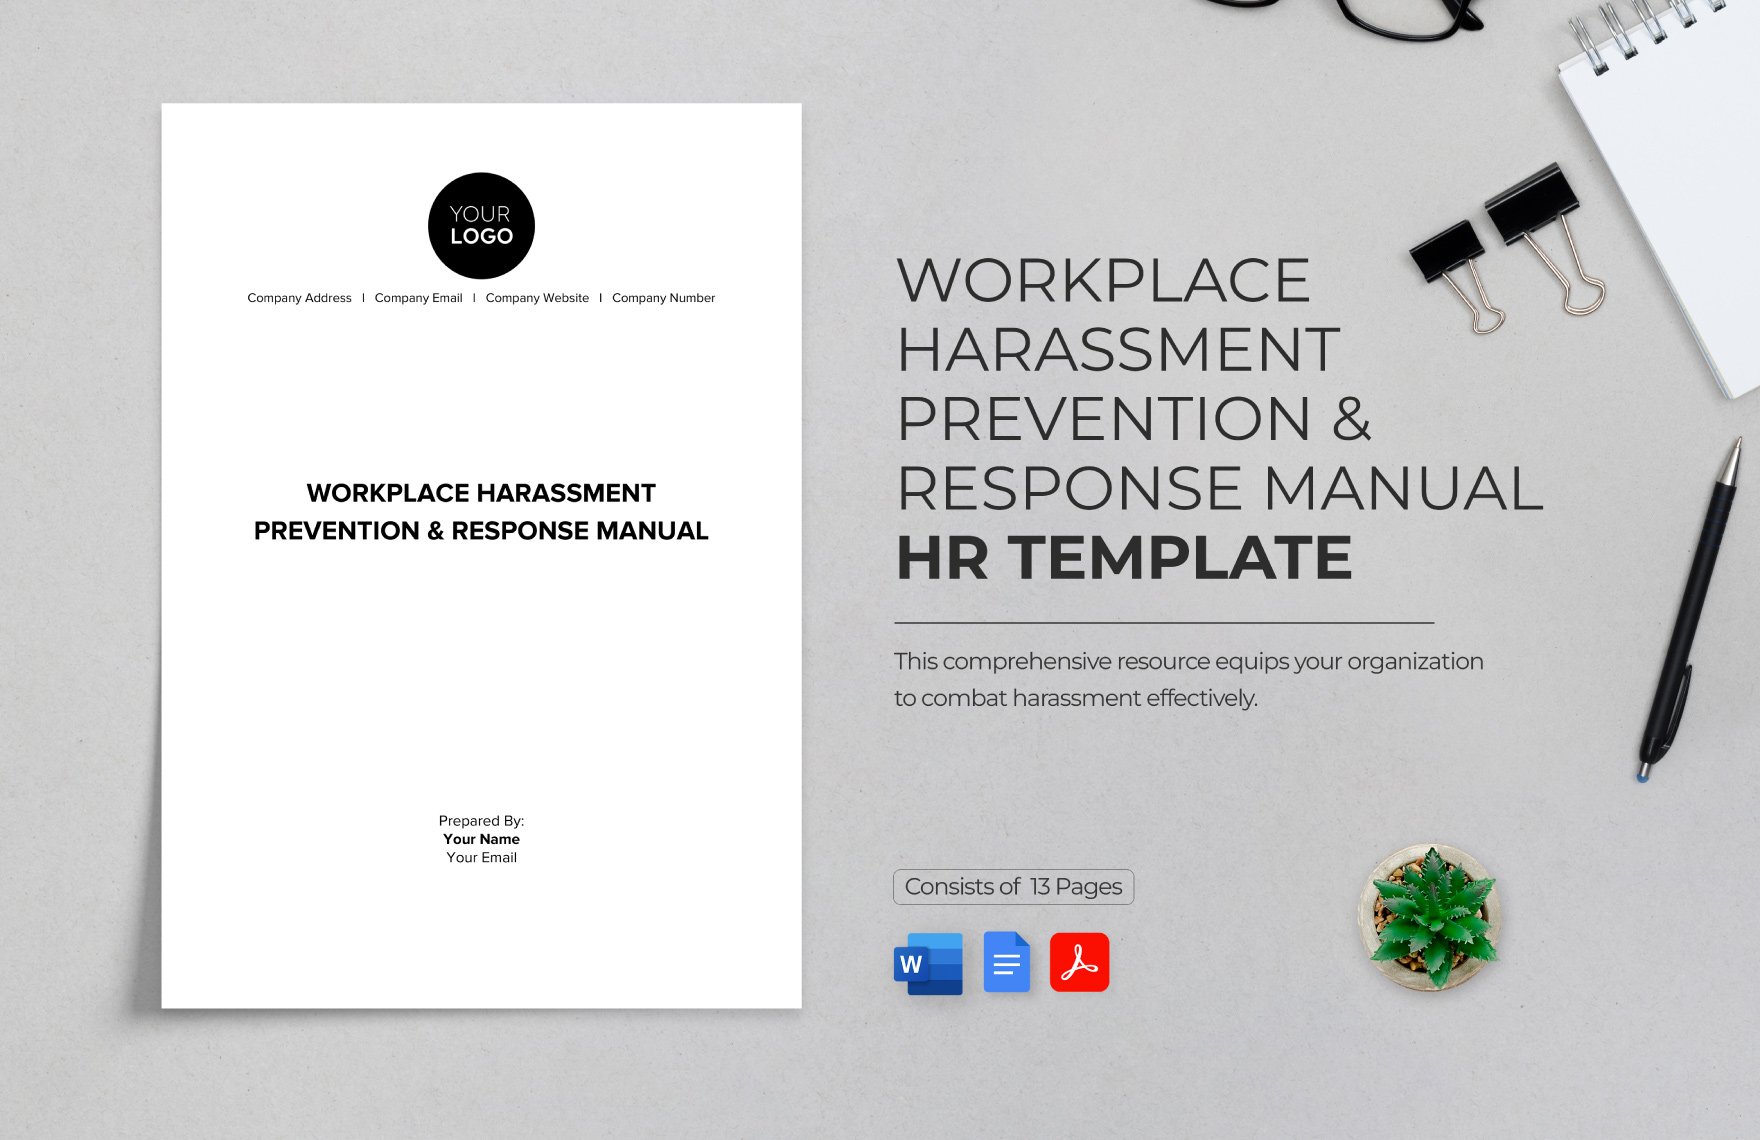 Workplace Harassment Prevention & Response Manual HR Template